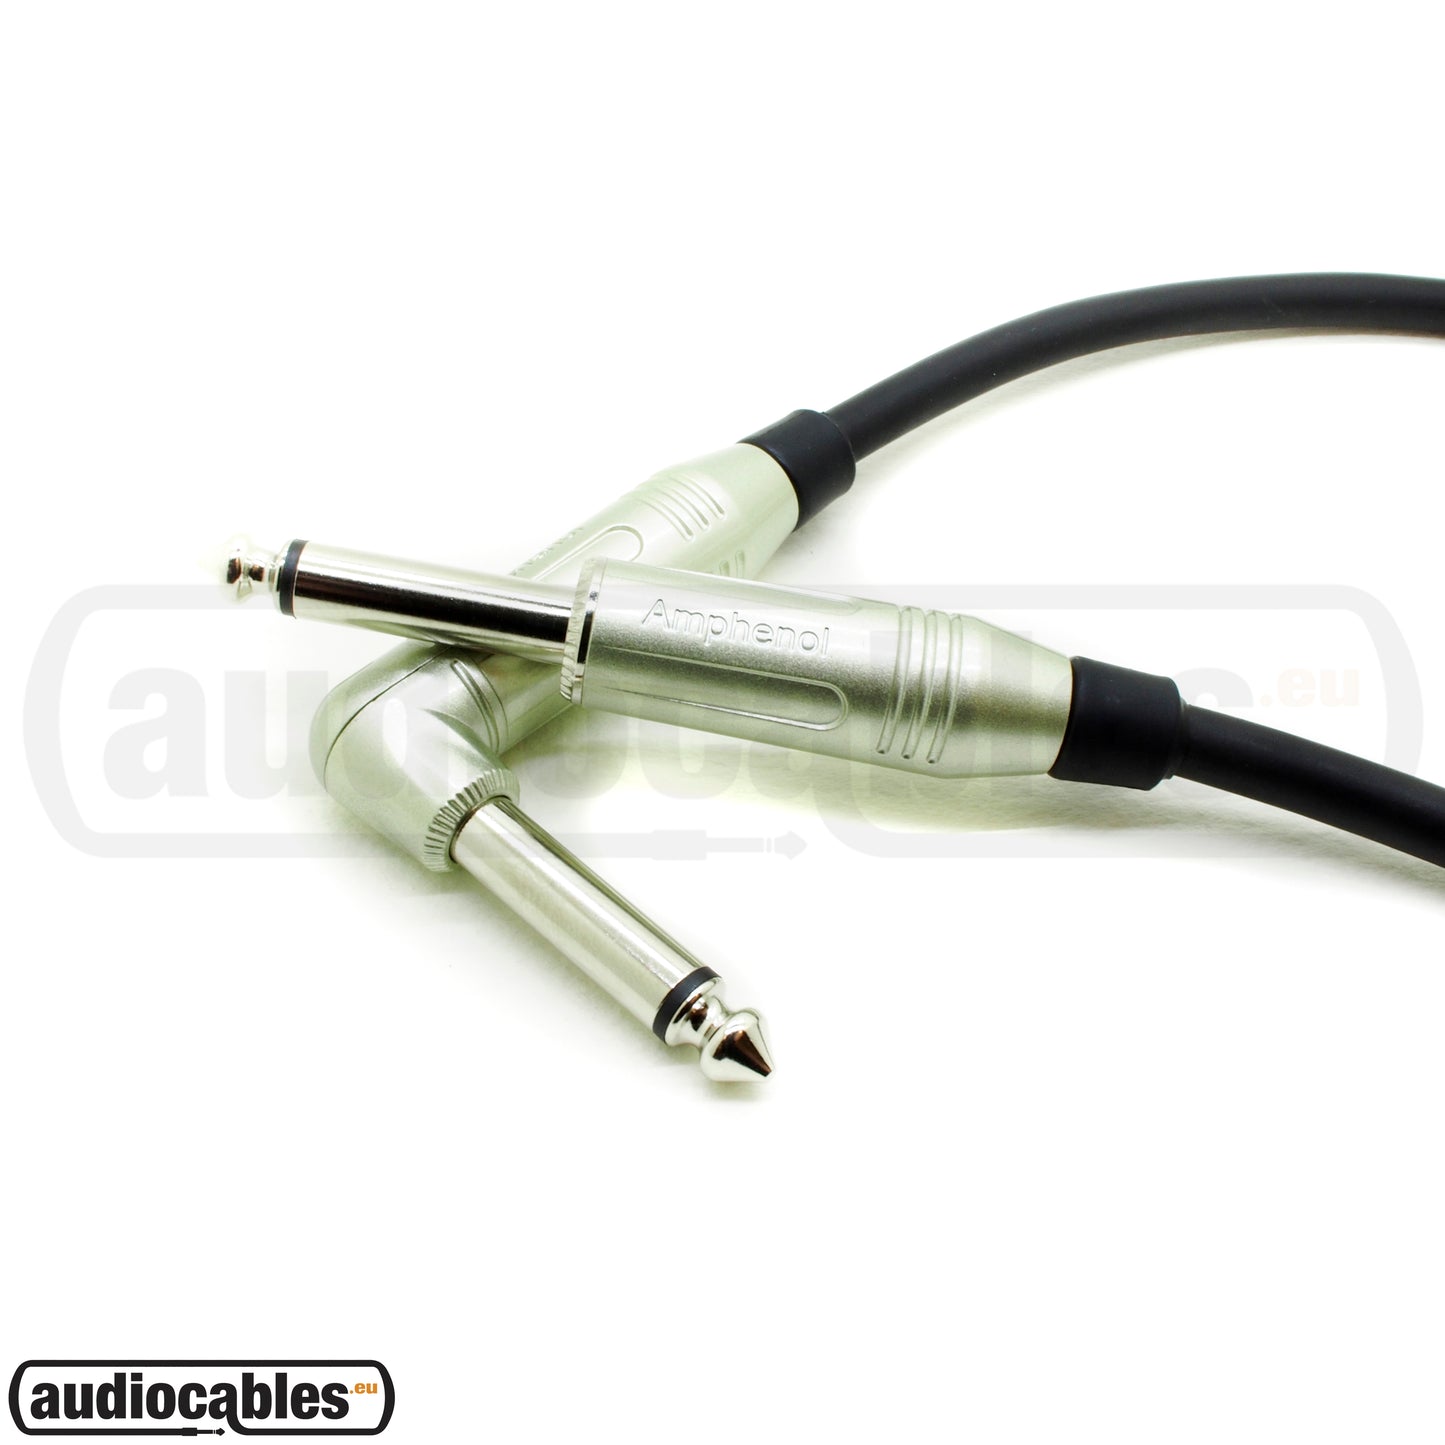 Mogami 2524 Patch Cable w/ Amphenol Connectors Single Angled